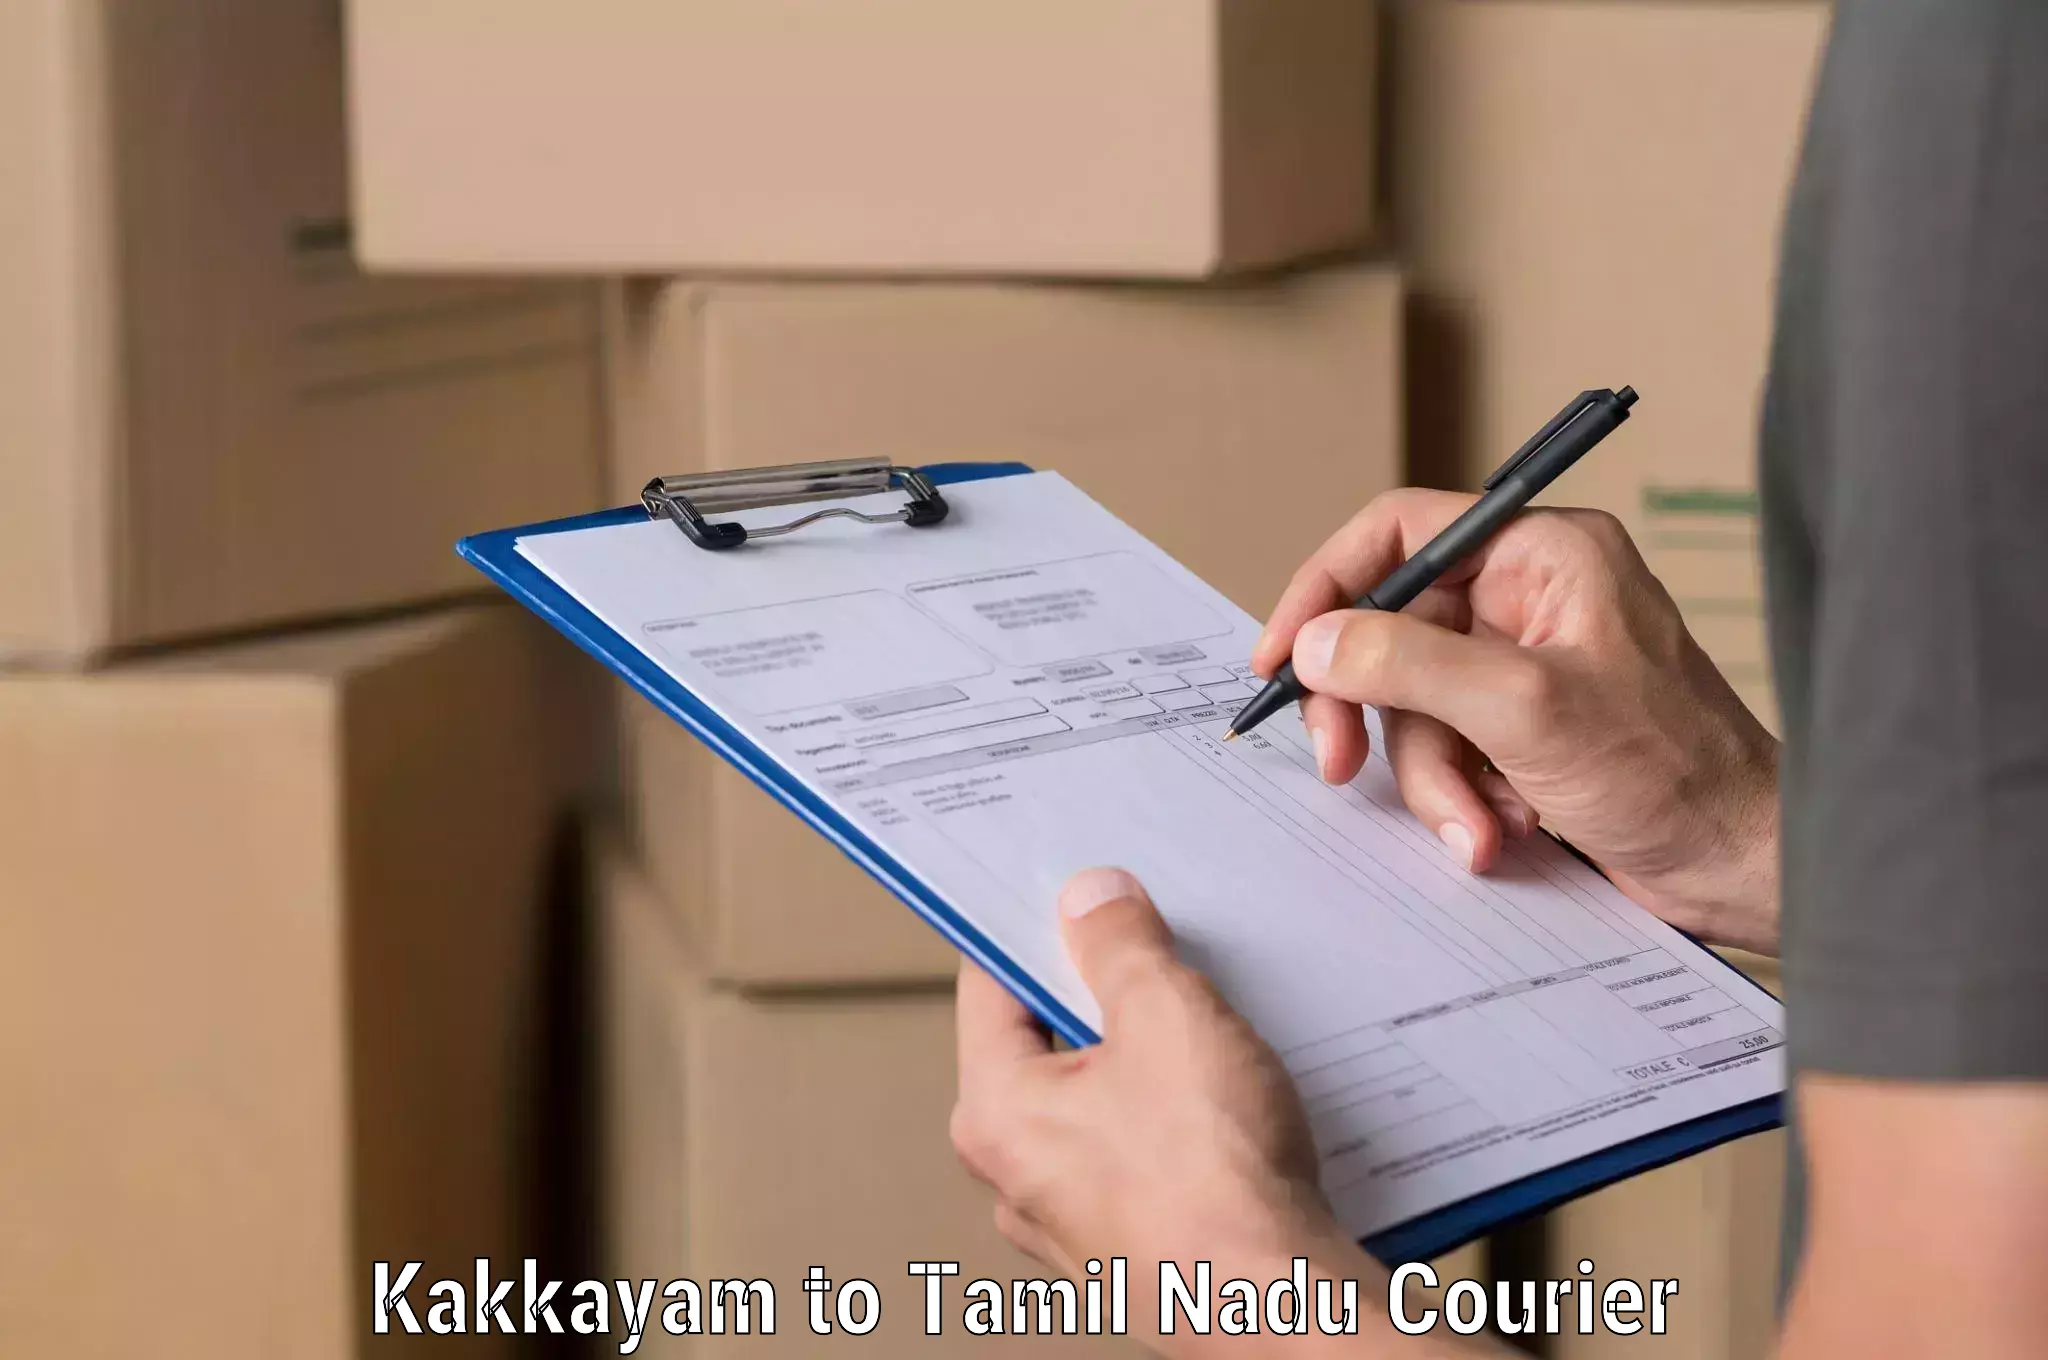 Optimized delivery routes in Kakkayam to Thanjavur